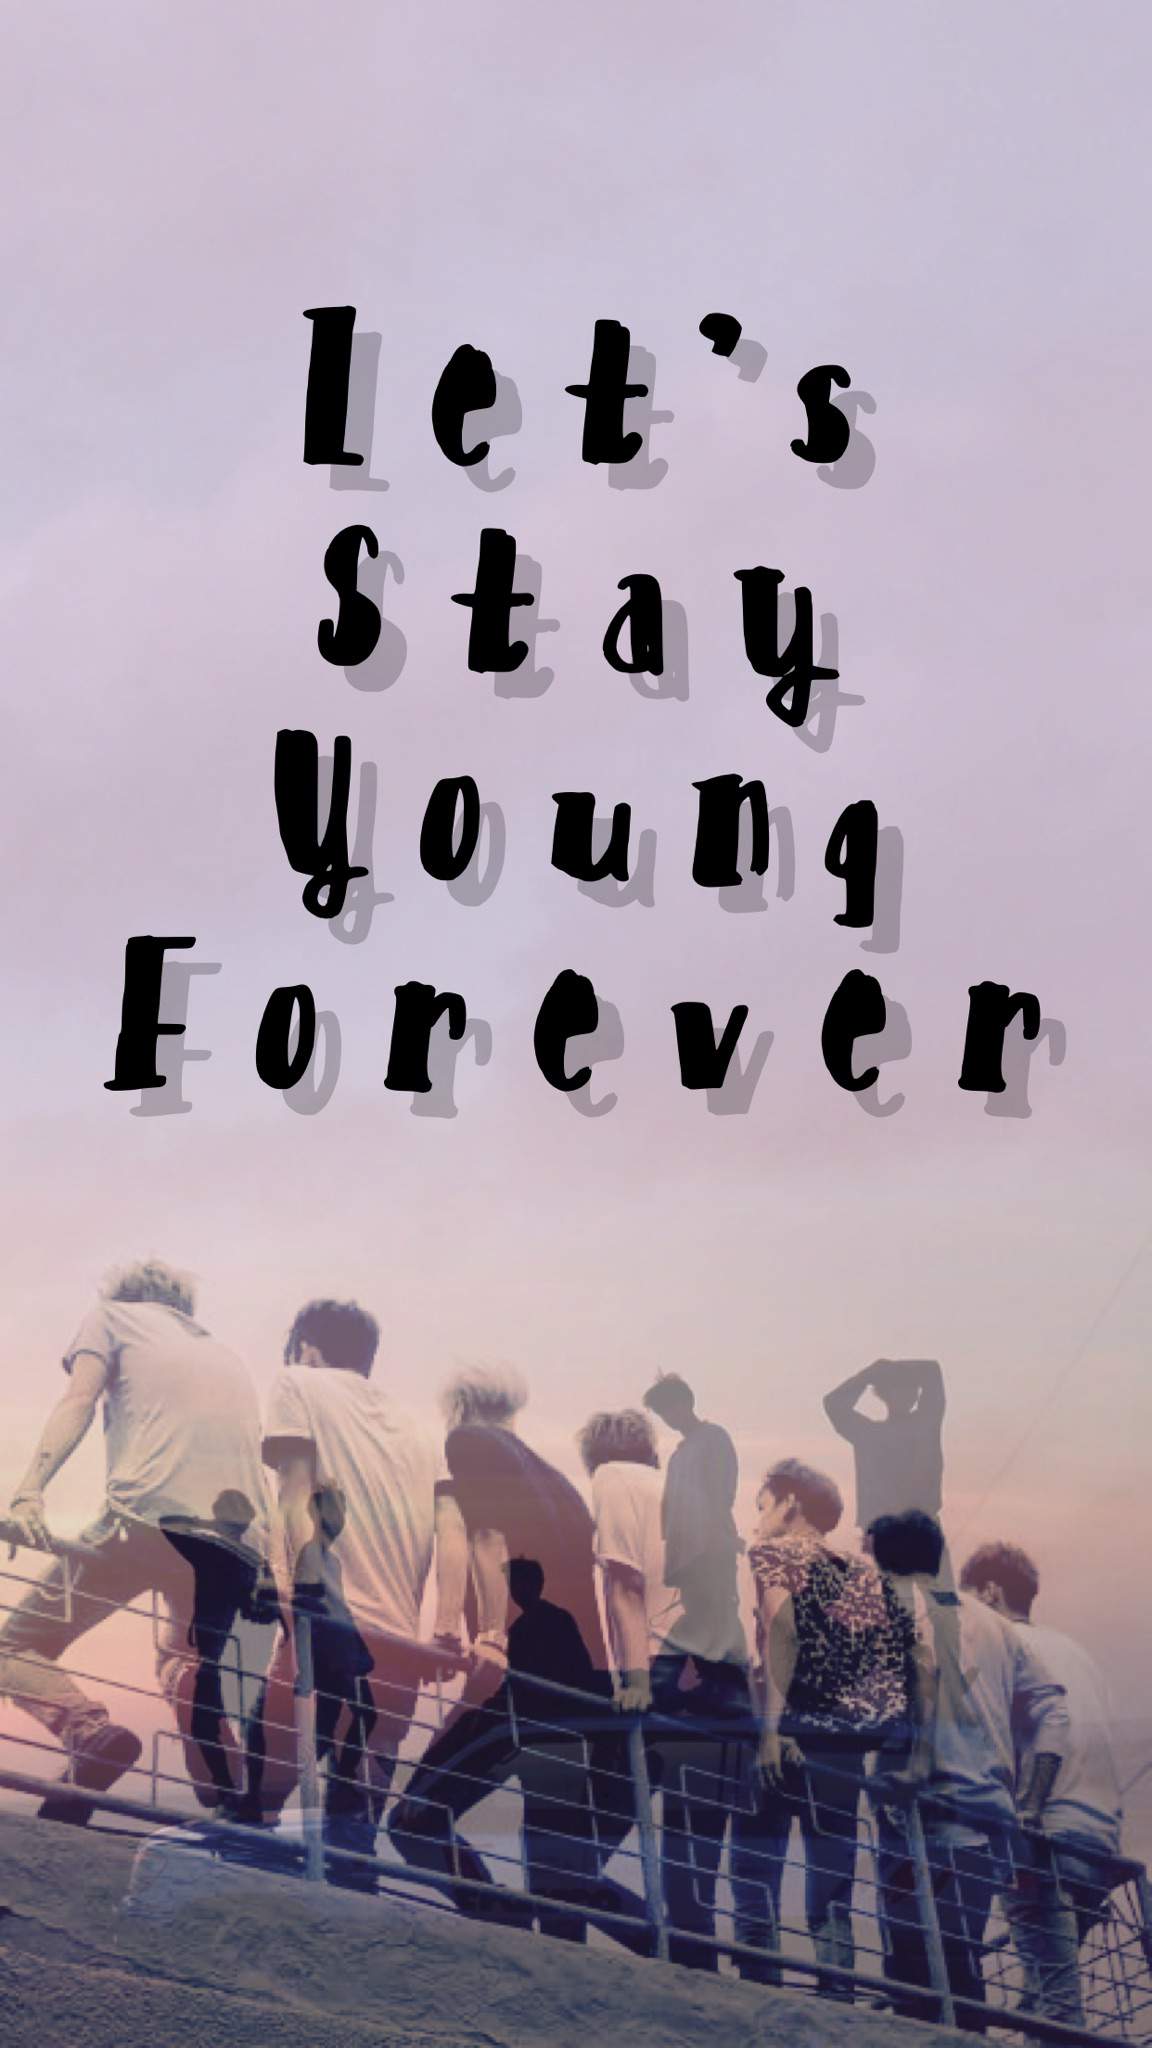 BTS Young Forever Wallpaper Edits. ARMY's Amino